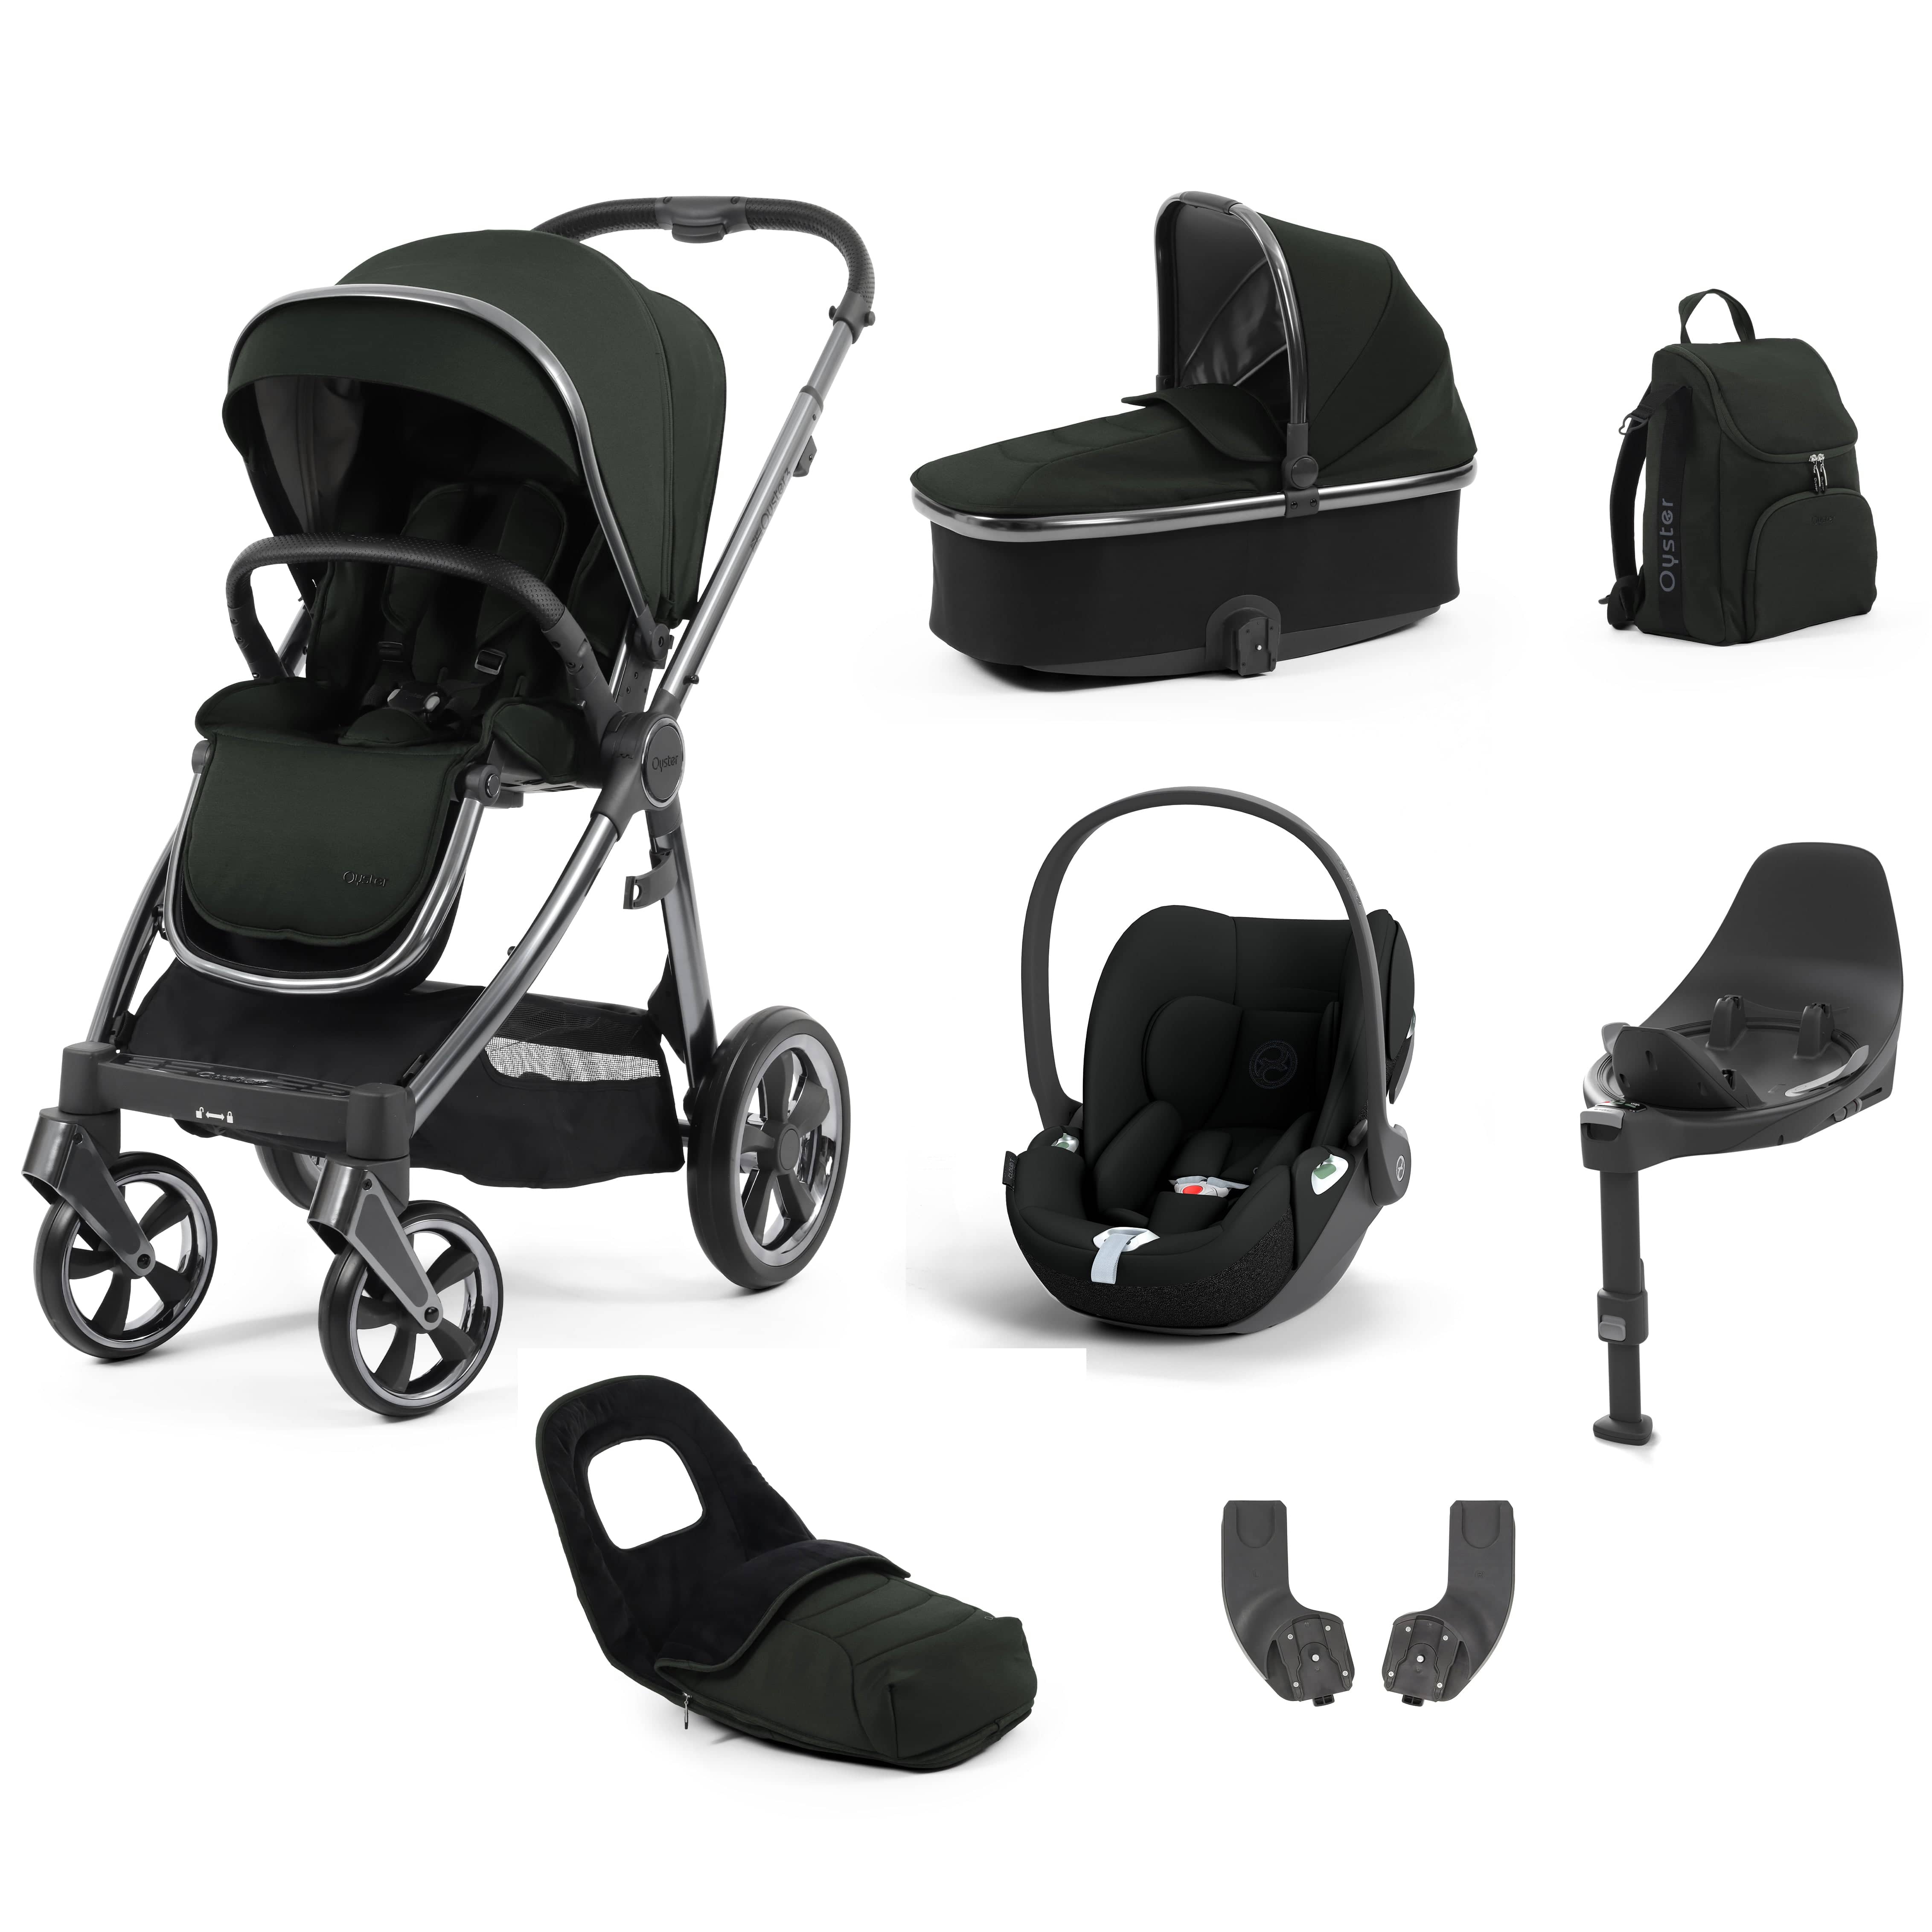 Babystyle Oyster 3 Luxury 7 Piece with Car Seat Bundle in Black Olive Travel Systems 14796-BLO 5060711567211